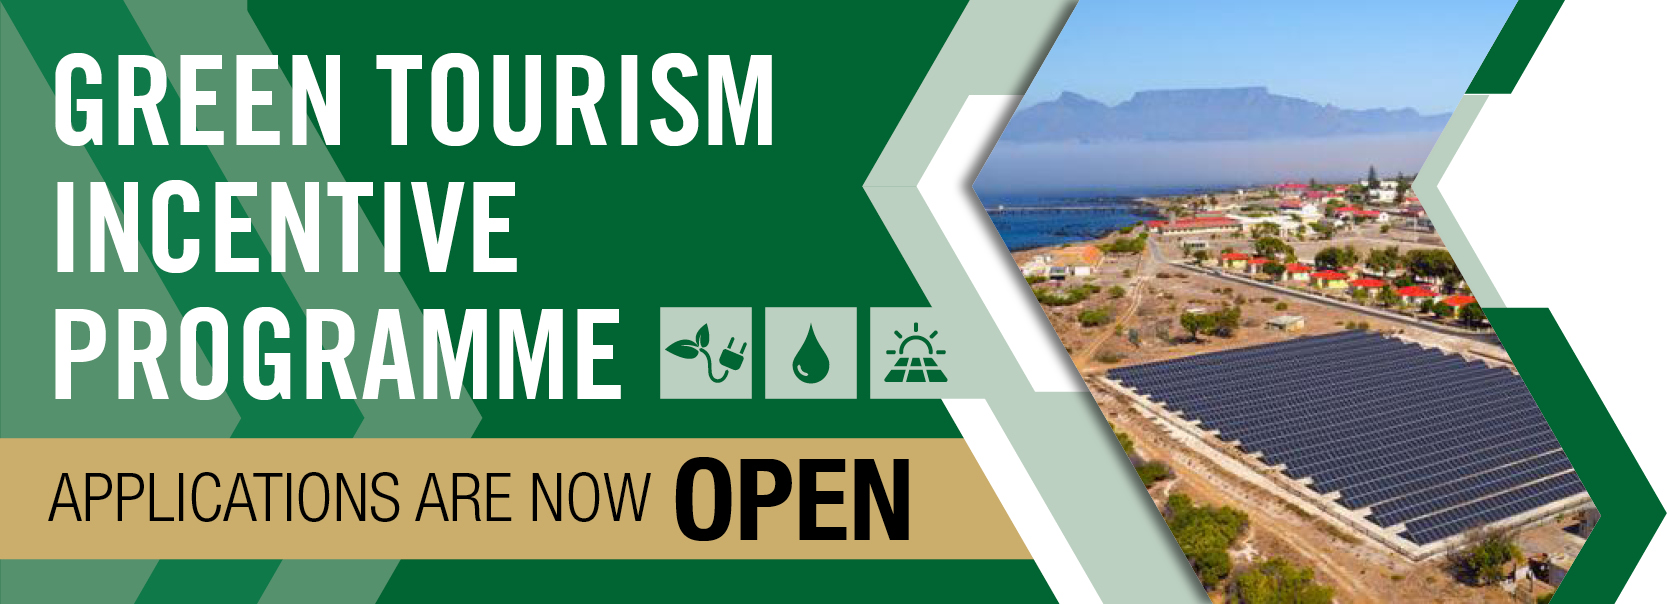 Energy Month heralds the opening of tourism resource efficiency applications